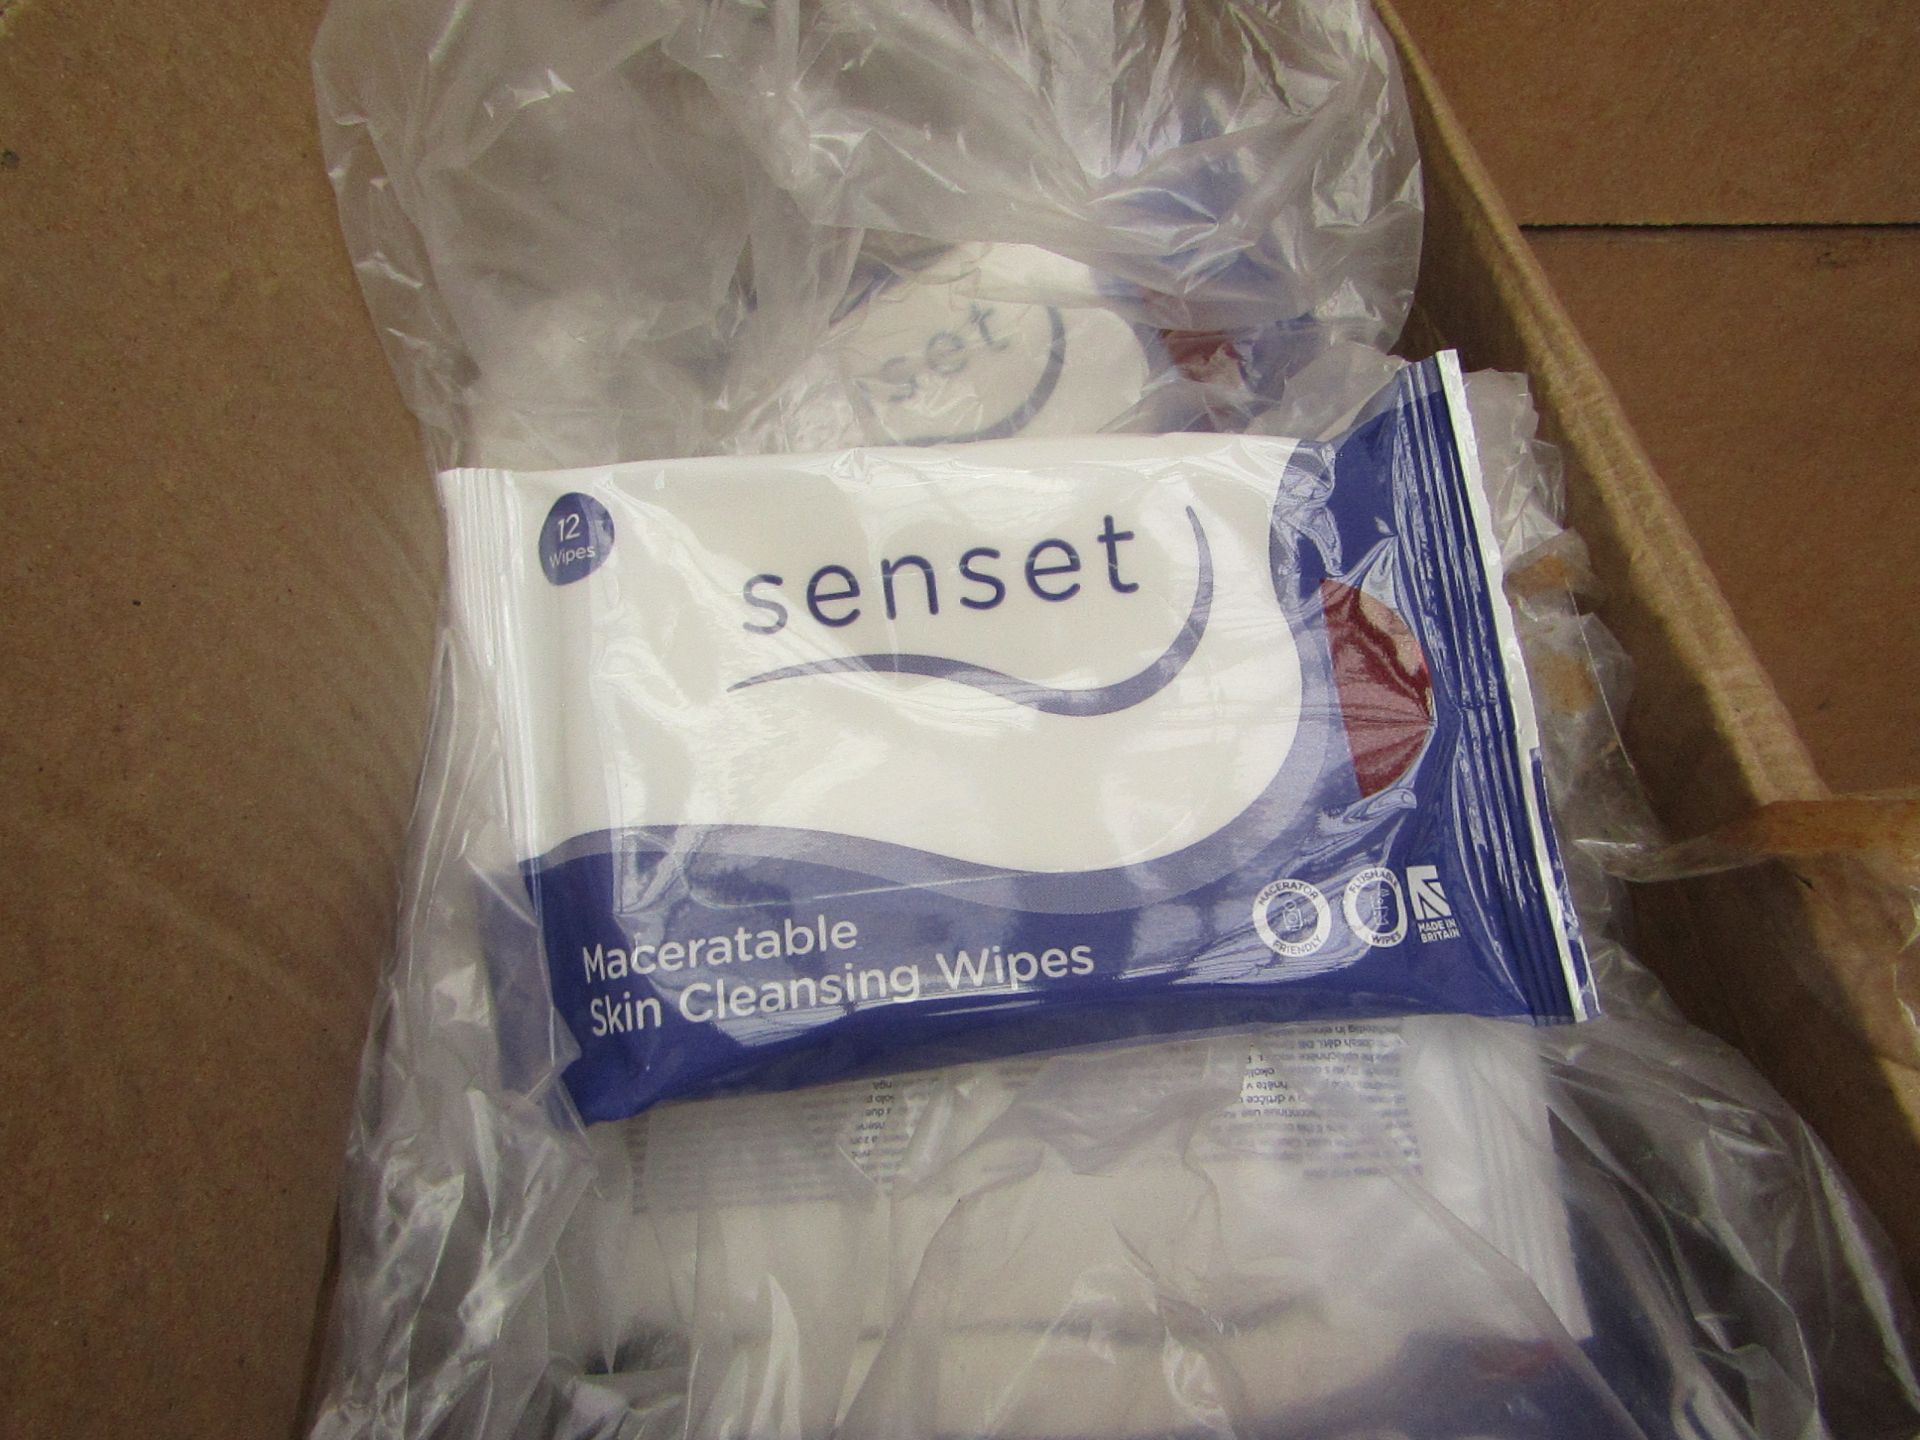 10X SENSET MACERATABLE SKIN CLEANING WIPIES, 12 WIPES PER PACKET, MACERATOR FRIENDLY, NEW &